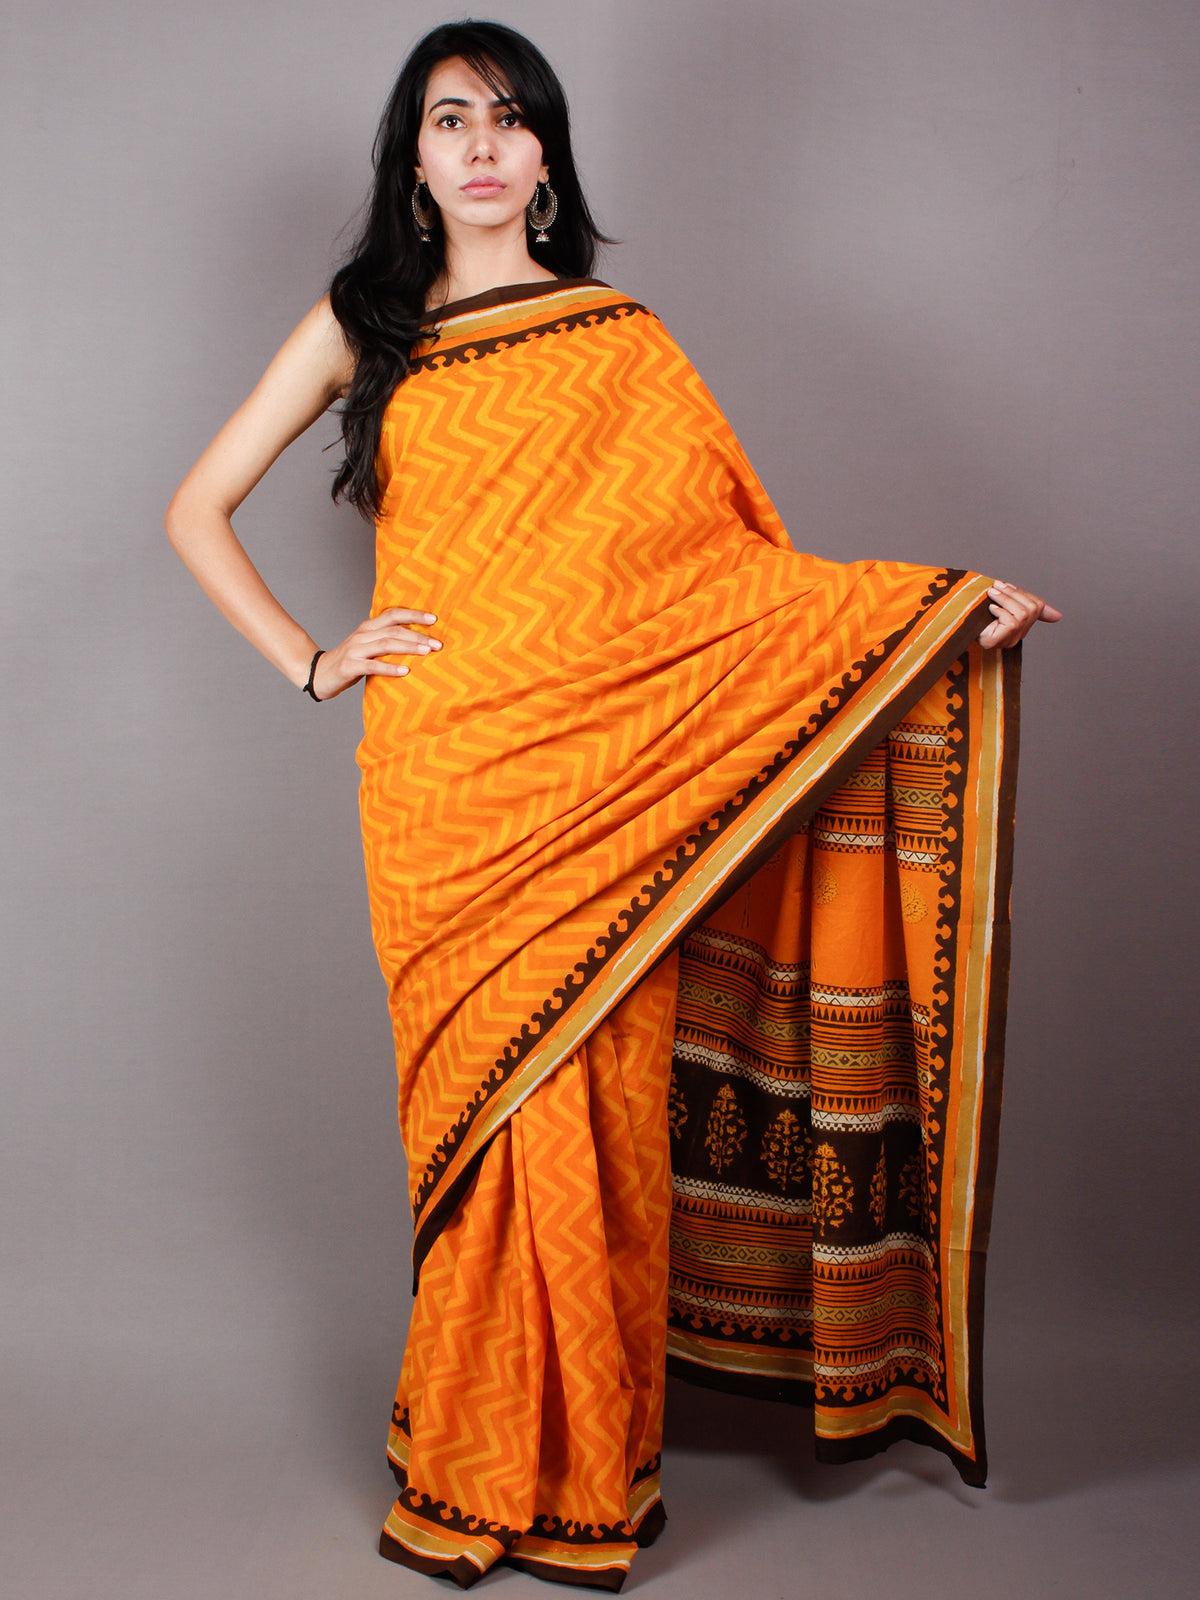 Orange Yellow Cotton Hand Block Printed Saree in Natural Colors With Brown Border - S03170486